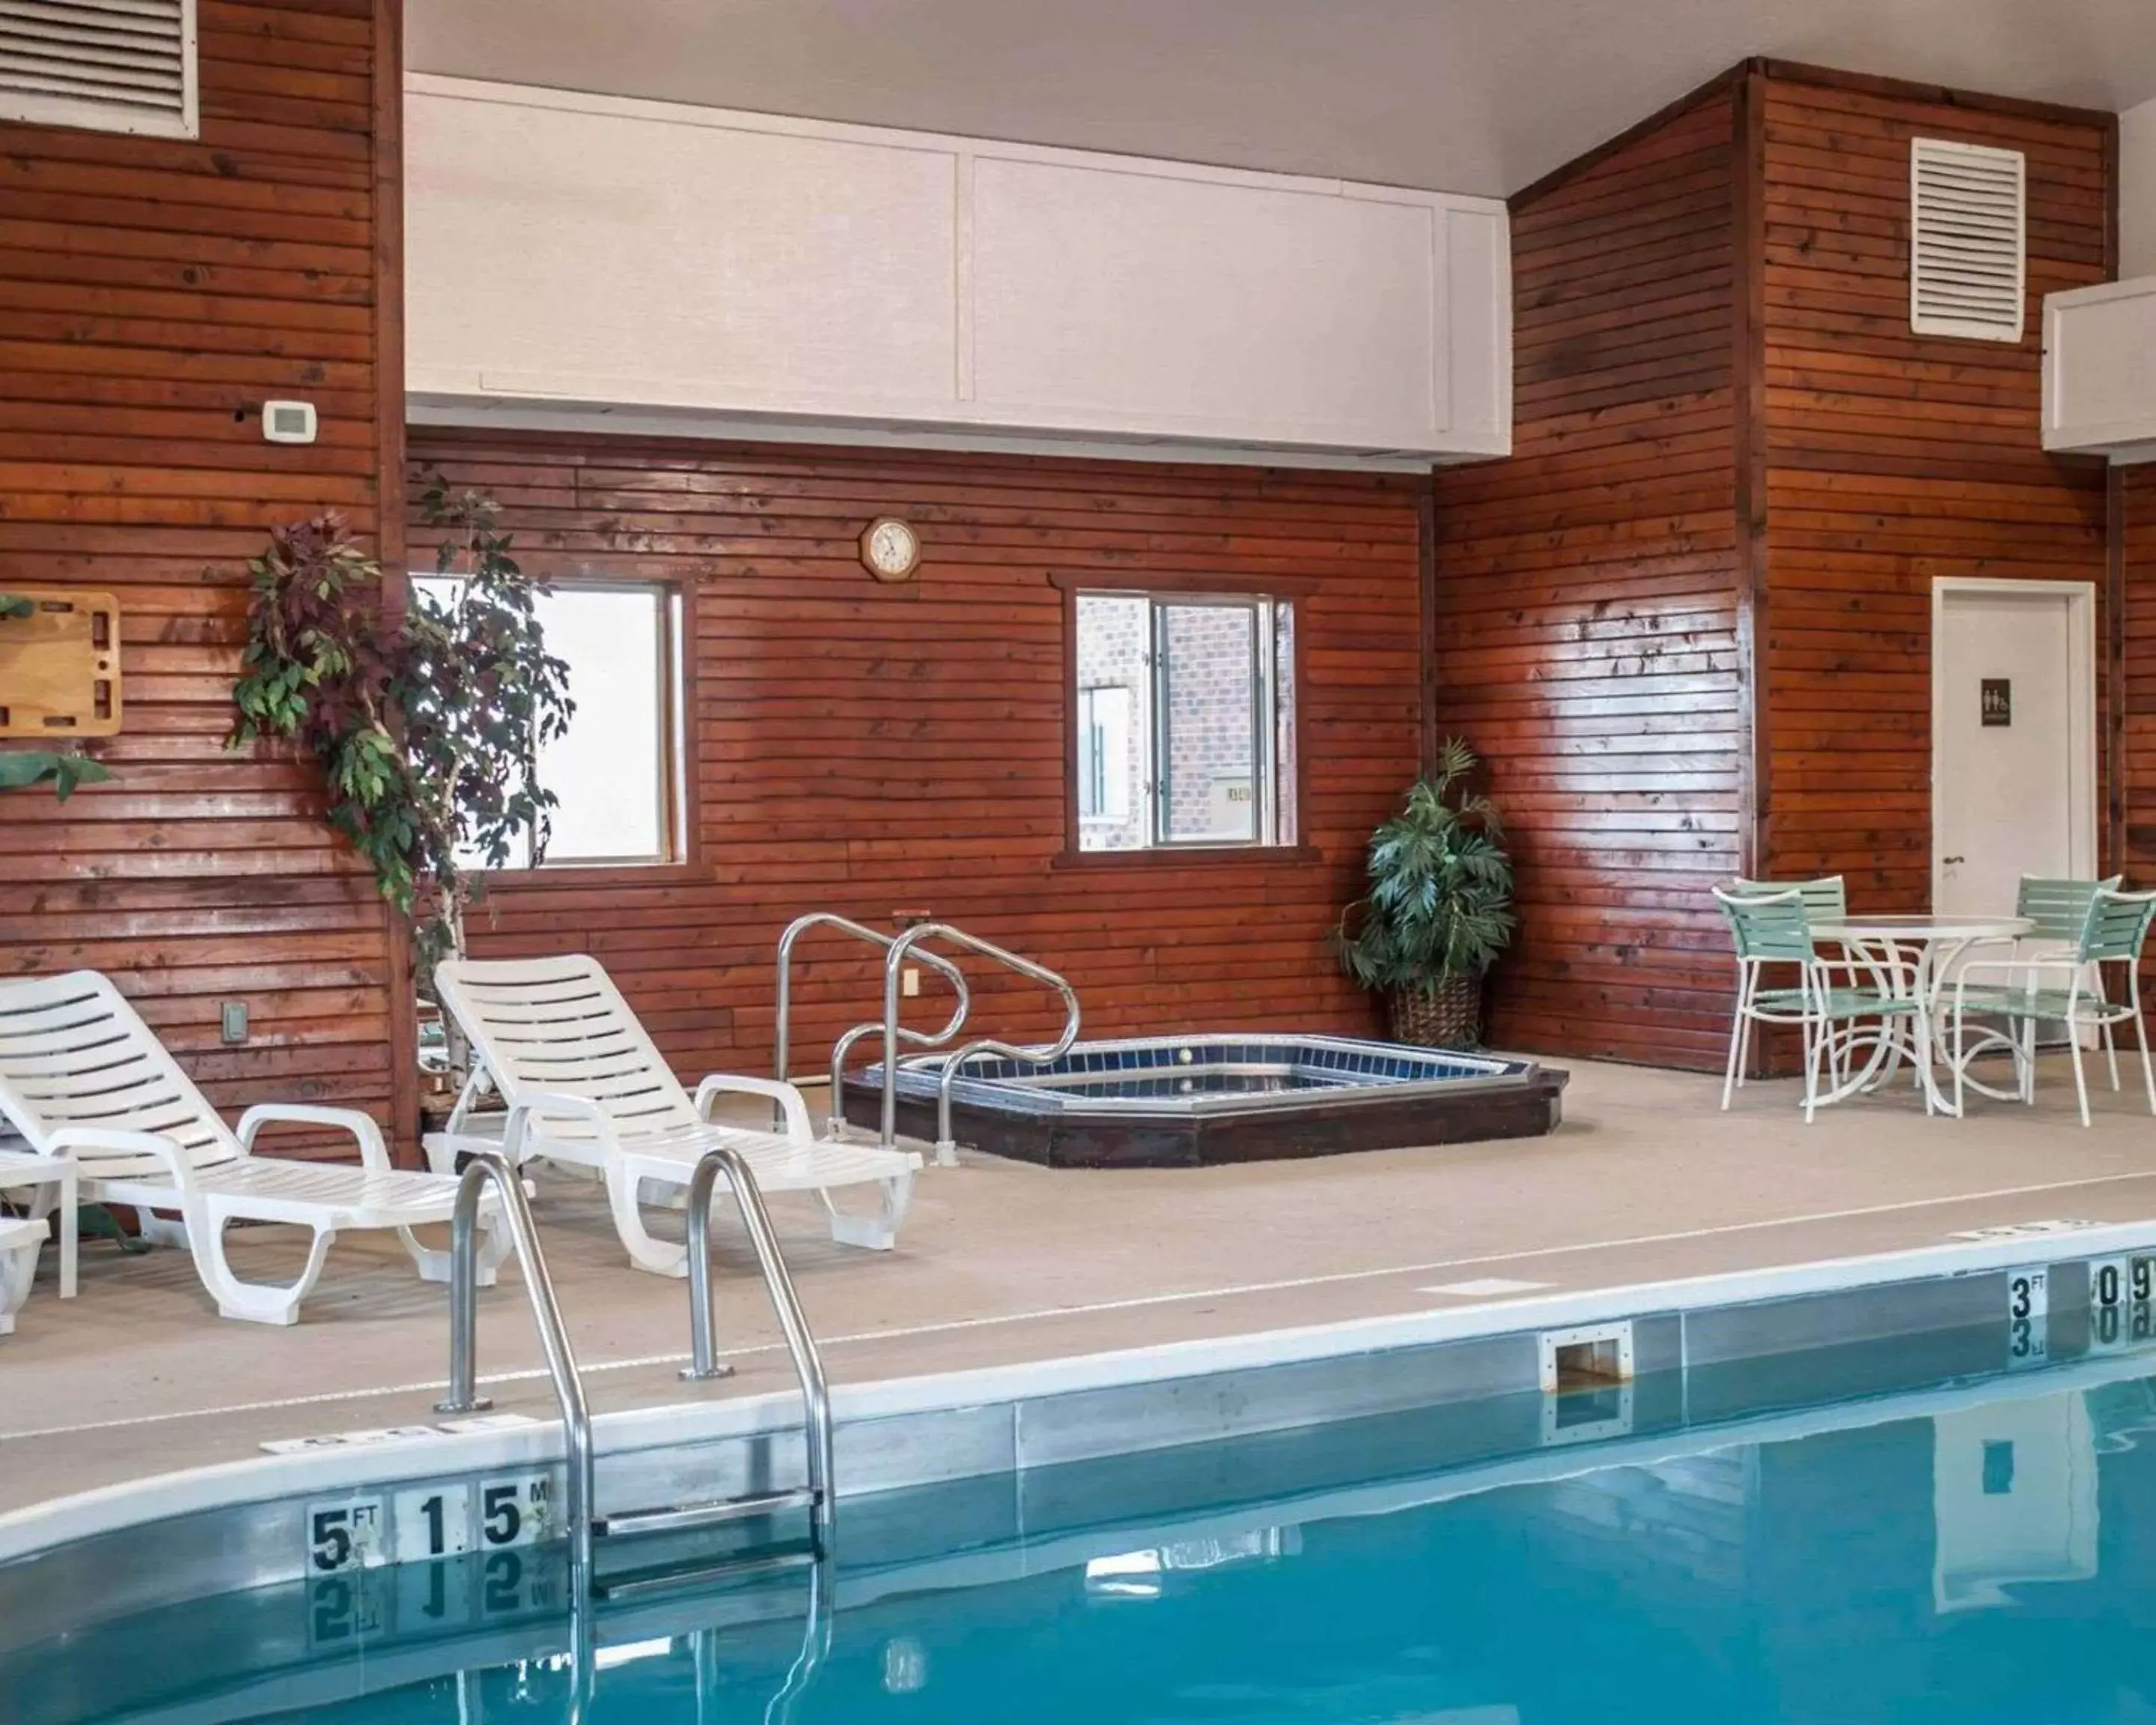 On site, Swimming Pool in Quality Inn Boonville - Columbia